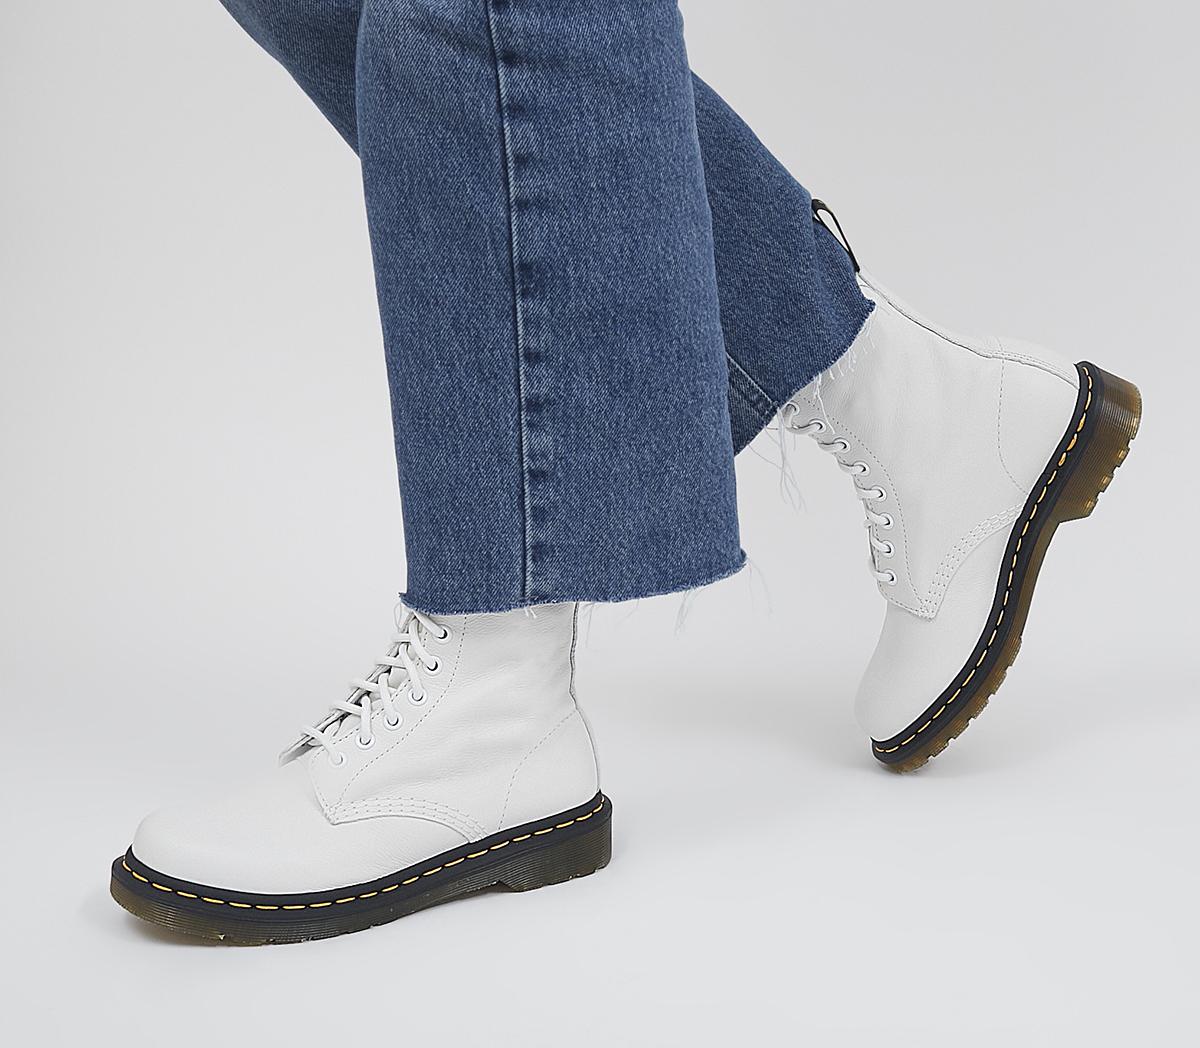 8 Eyelet Lace Up Boots